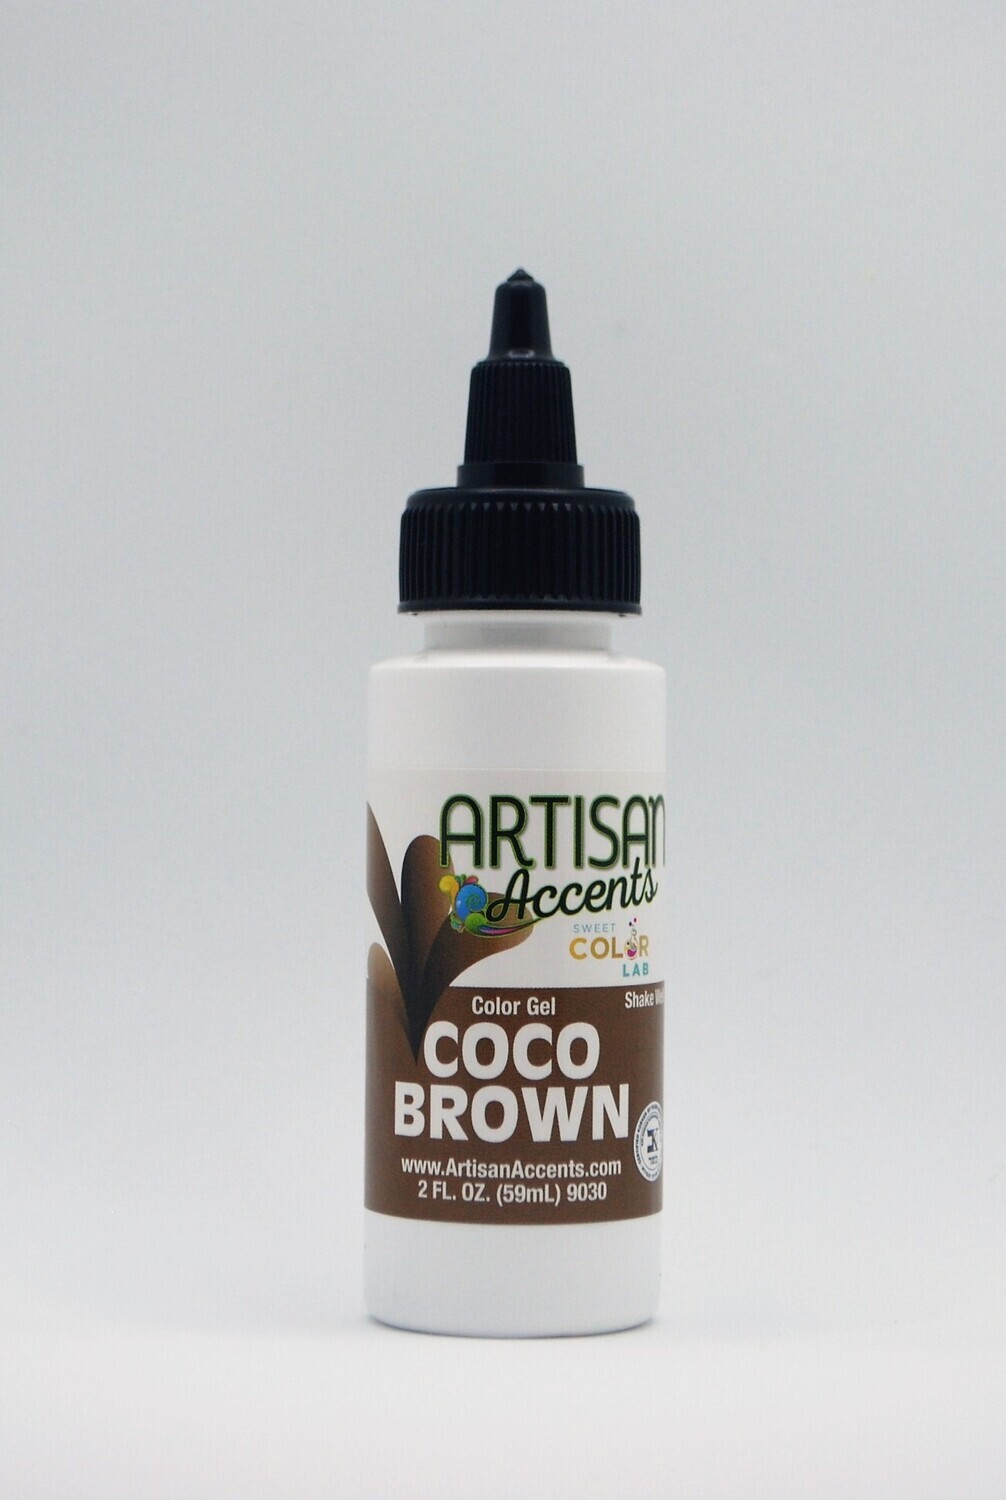 Artisan Accent Coco Brown